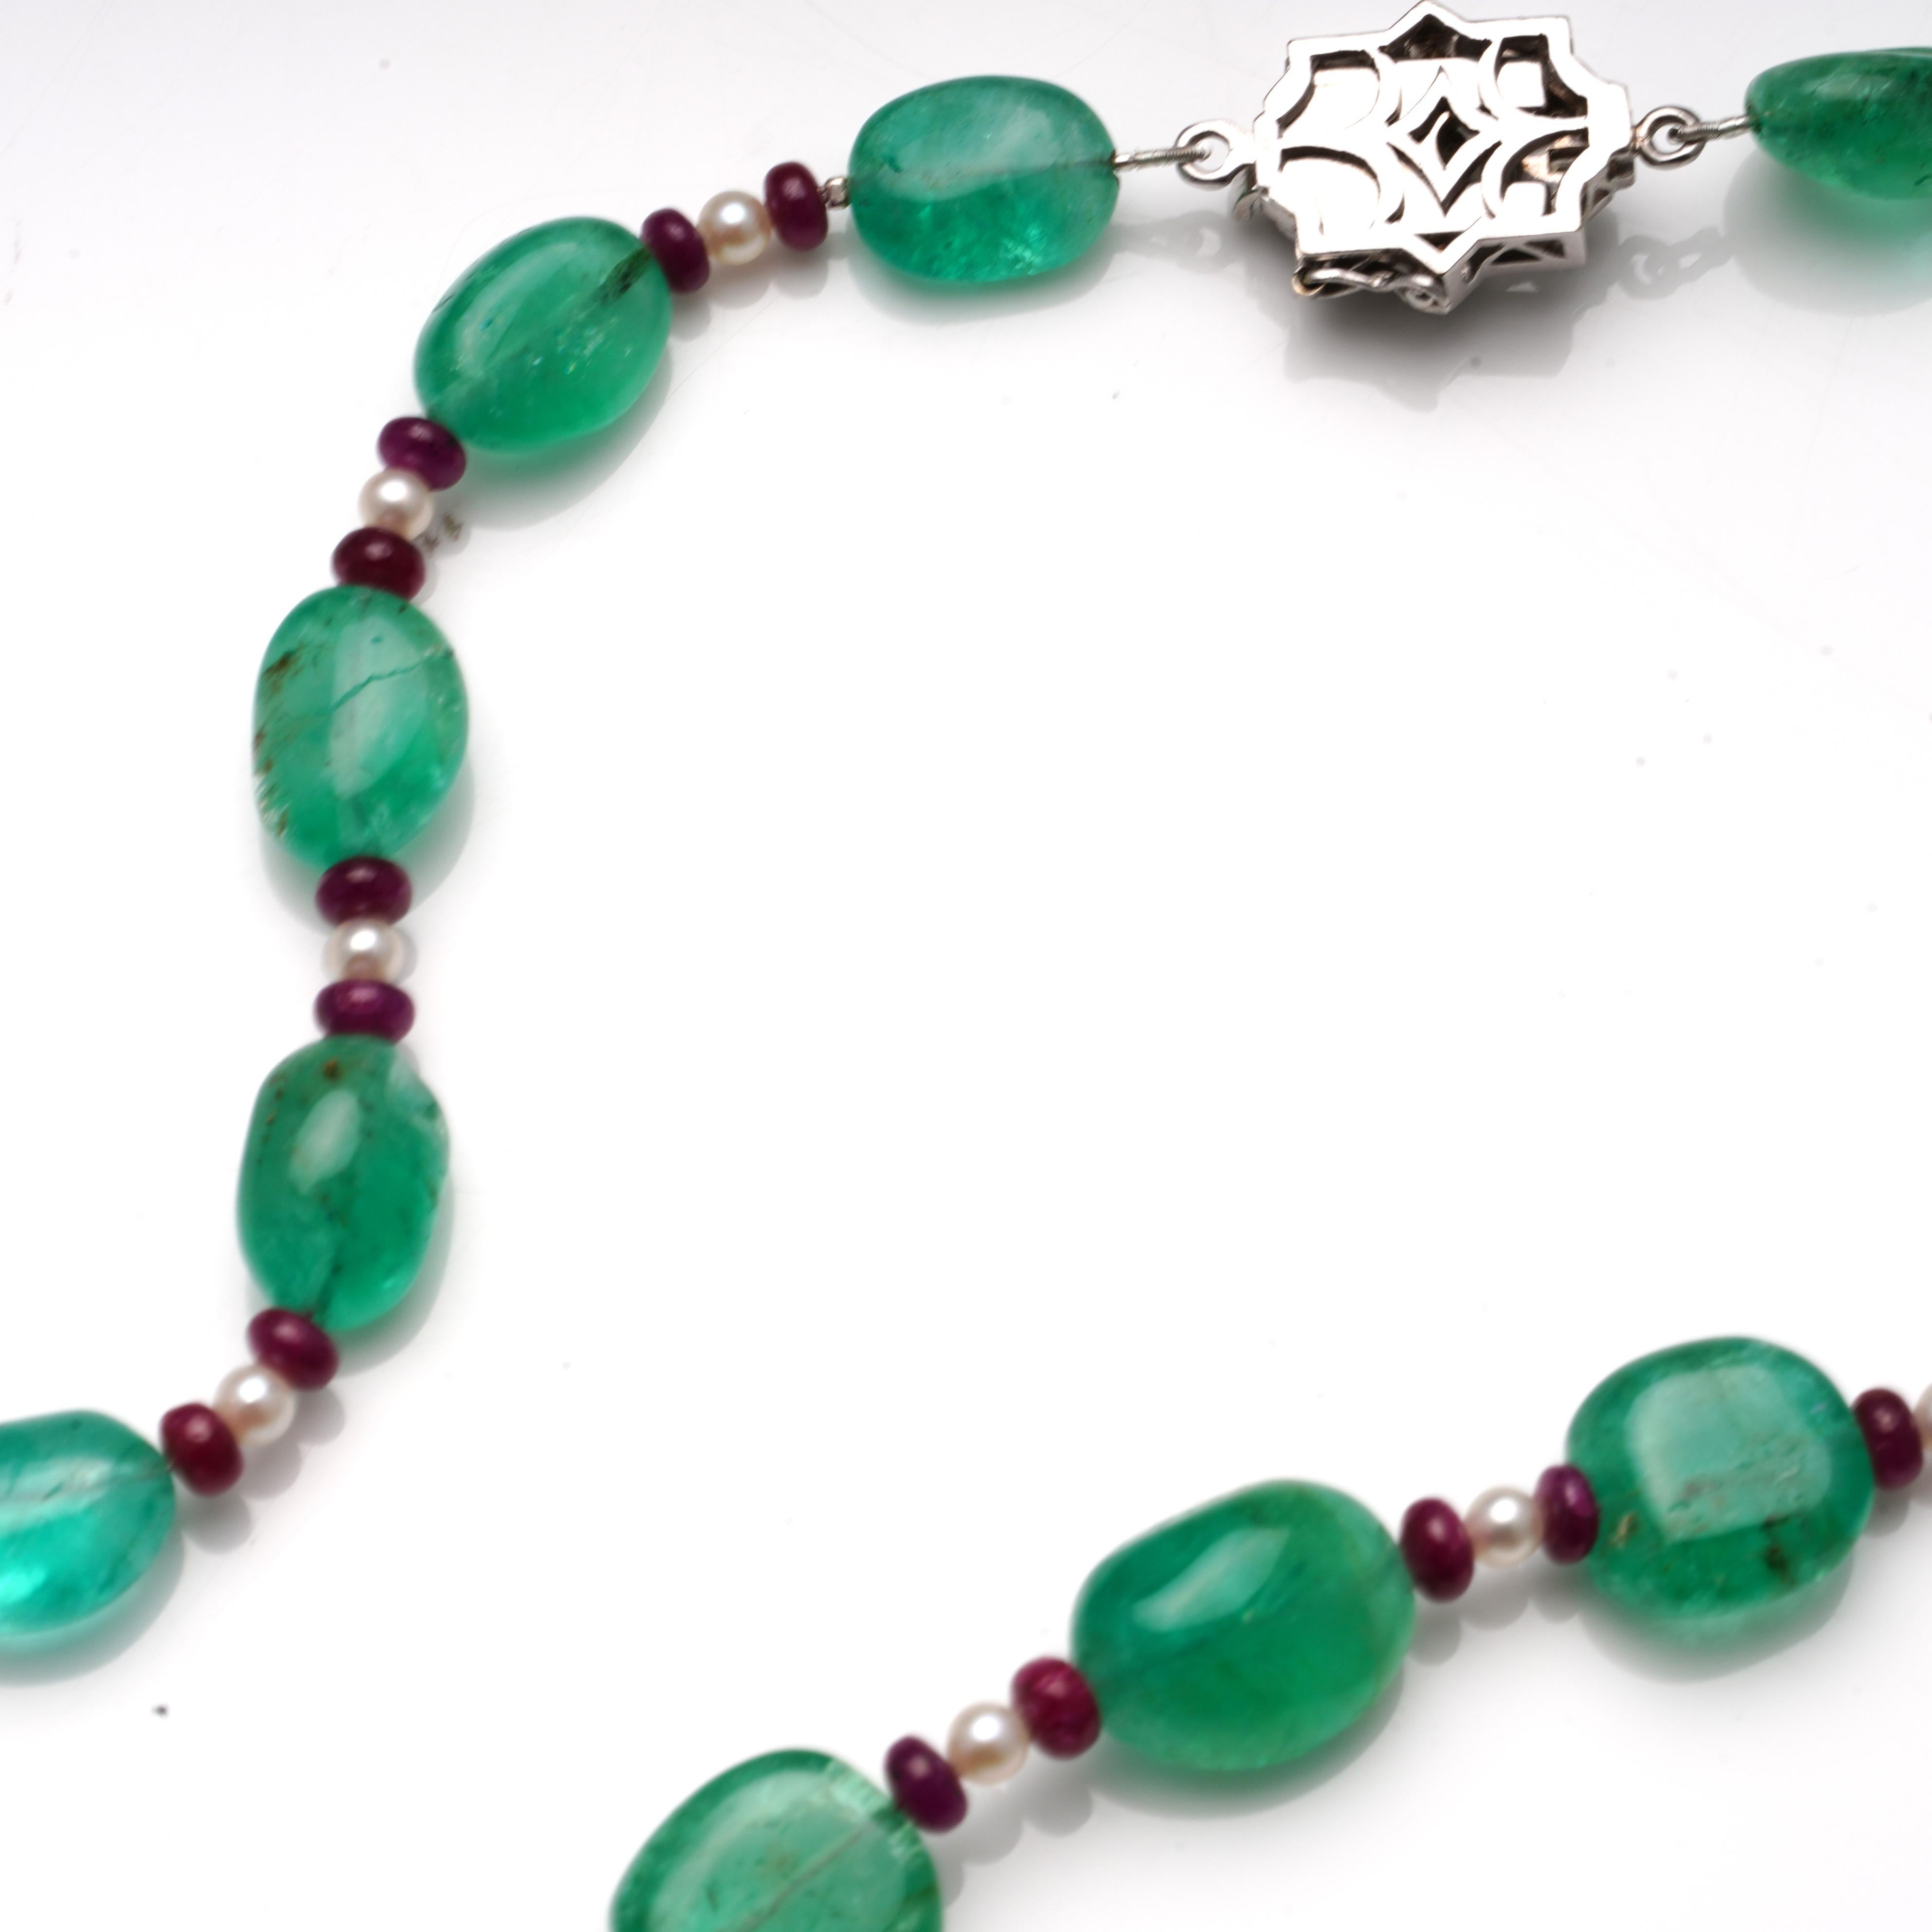 Bead Necklace with Emeralds, Rubellites and Seed Pearls. For Sale 2